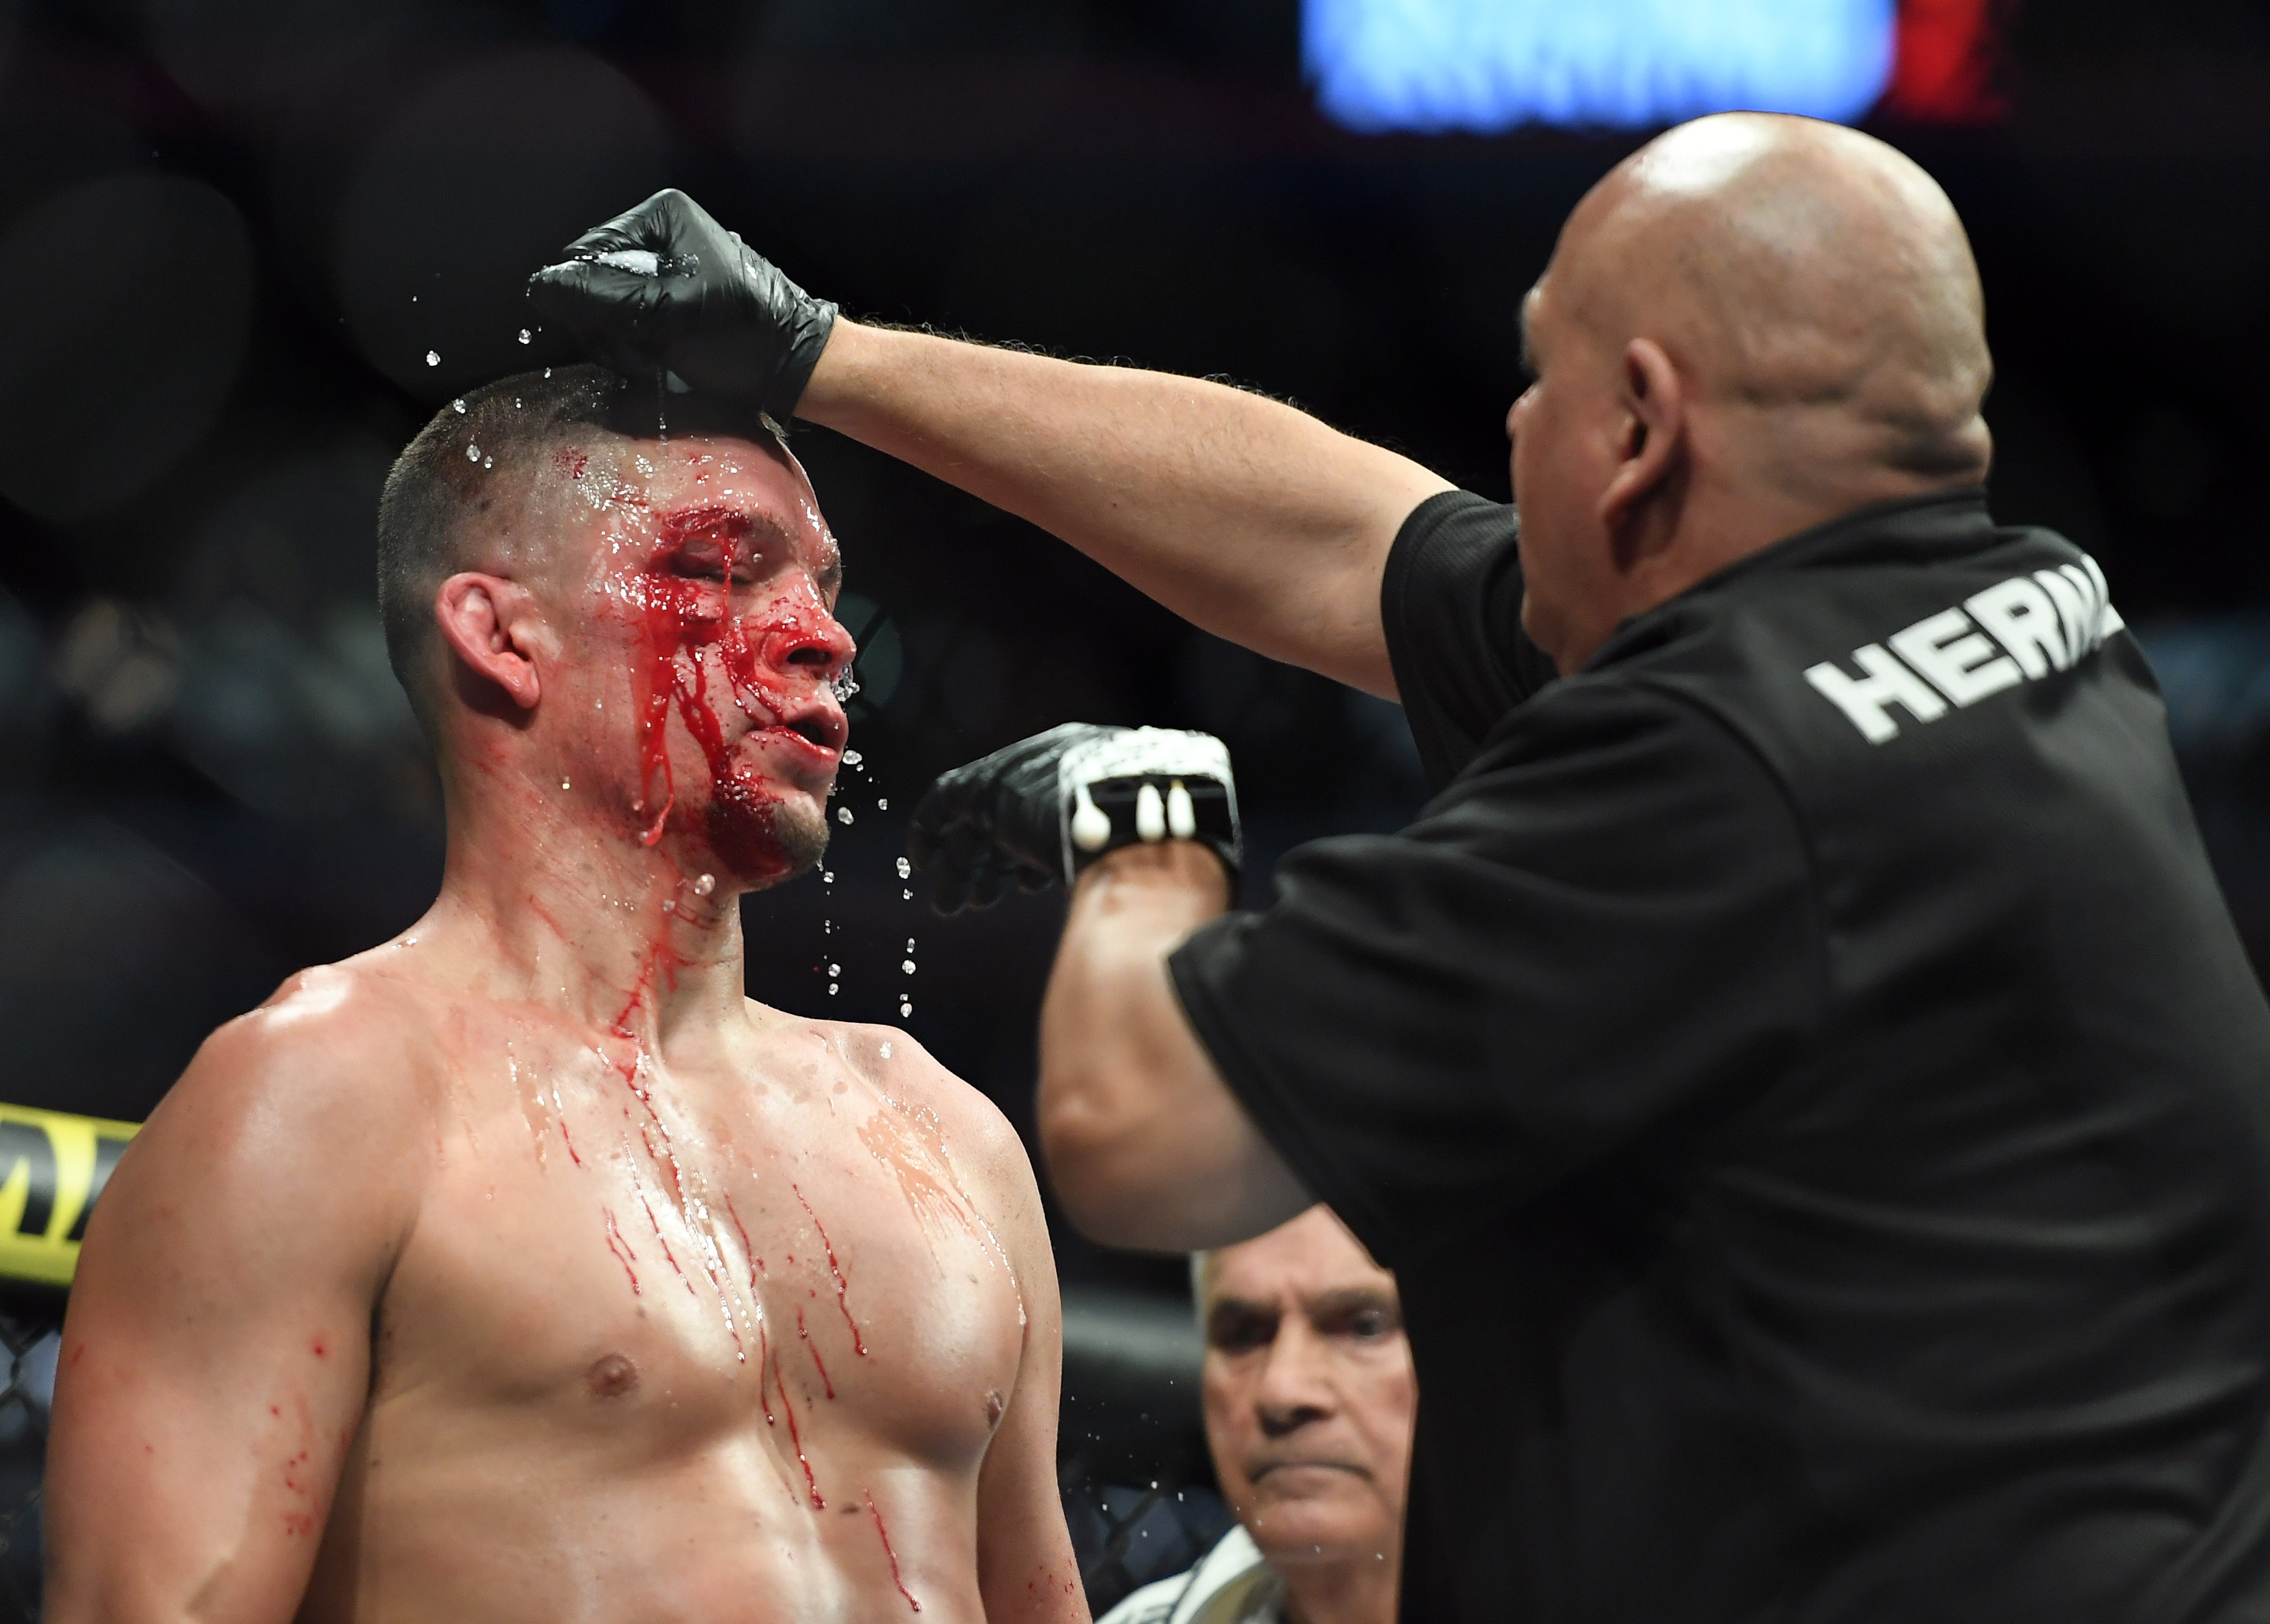 Nate Diaz gets treatment during his fight against Jorge Masvidal at UFC 244 at Madison Square Garden. Photo: USA TODAY Sports